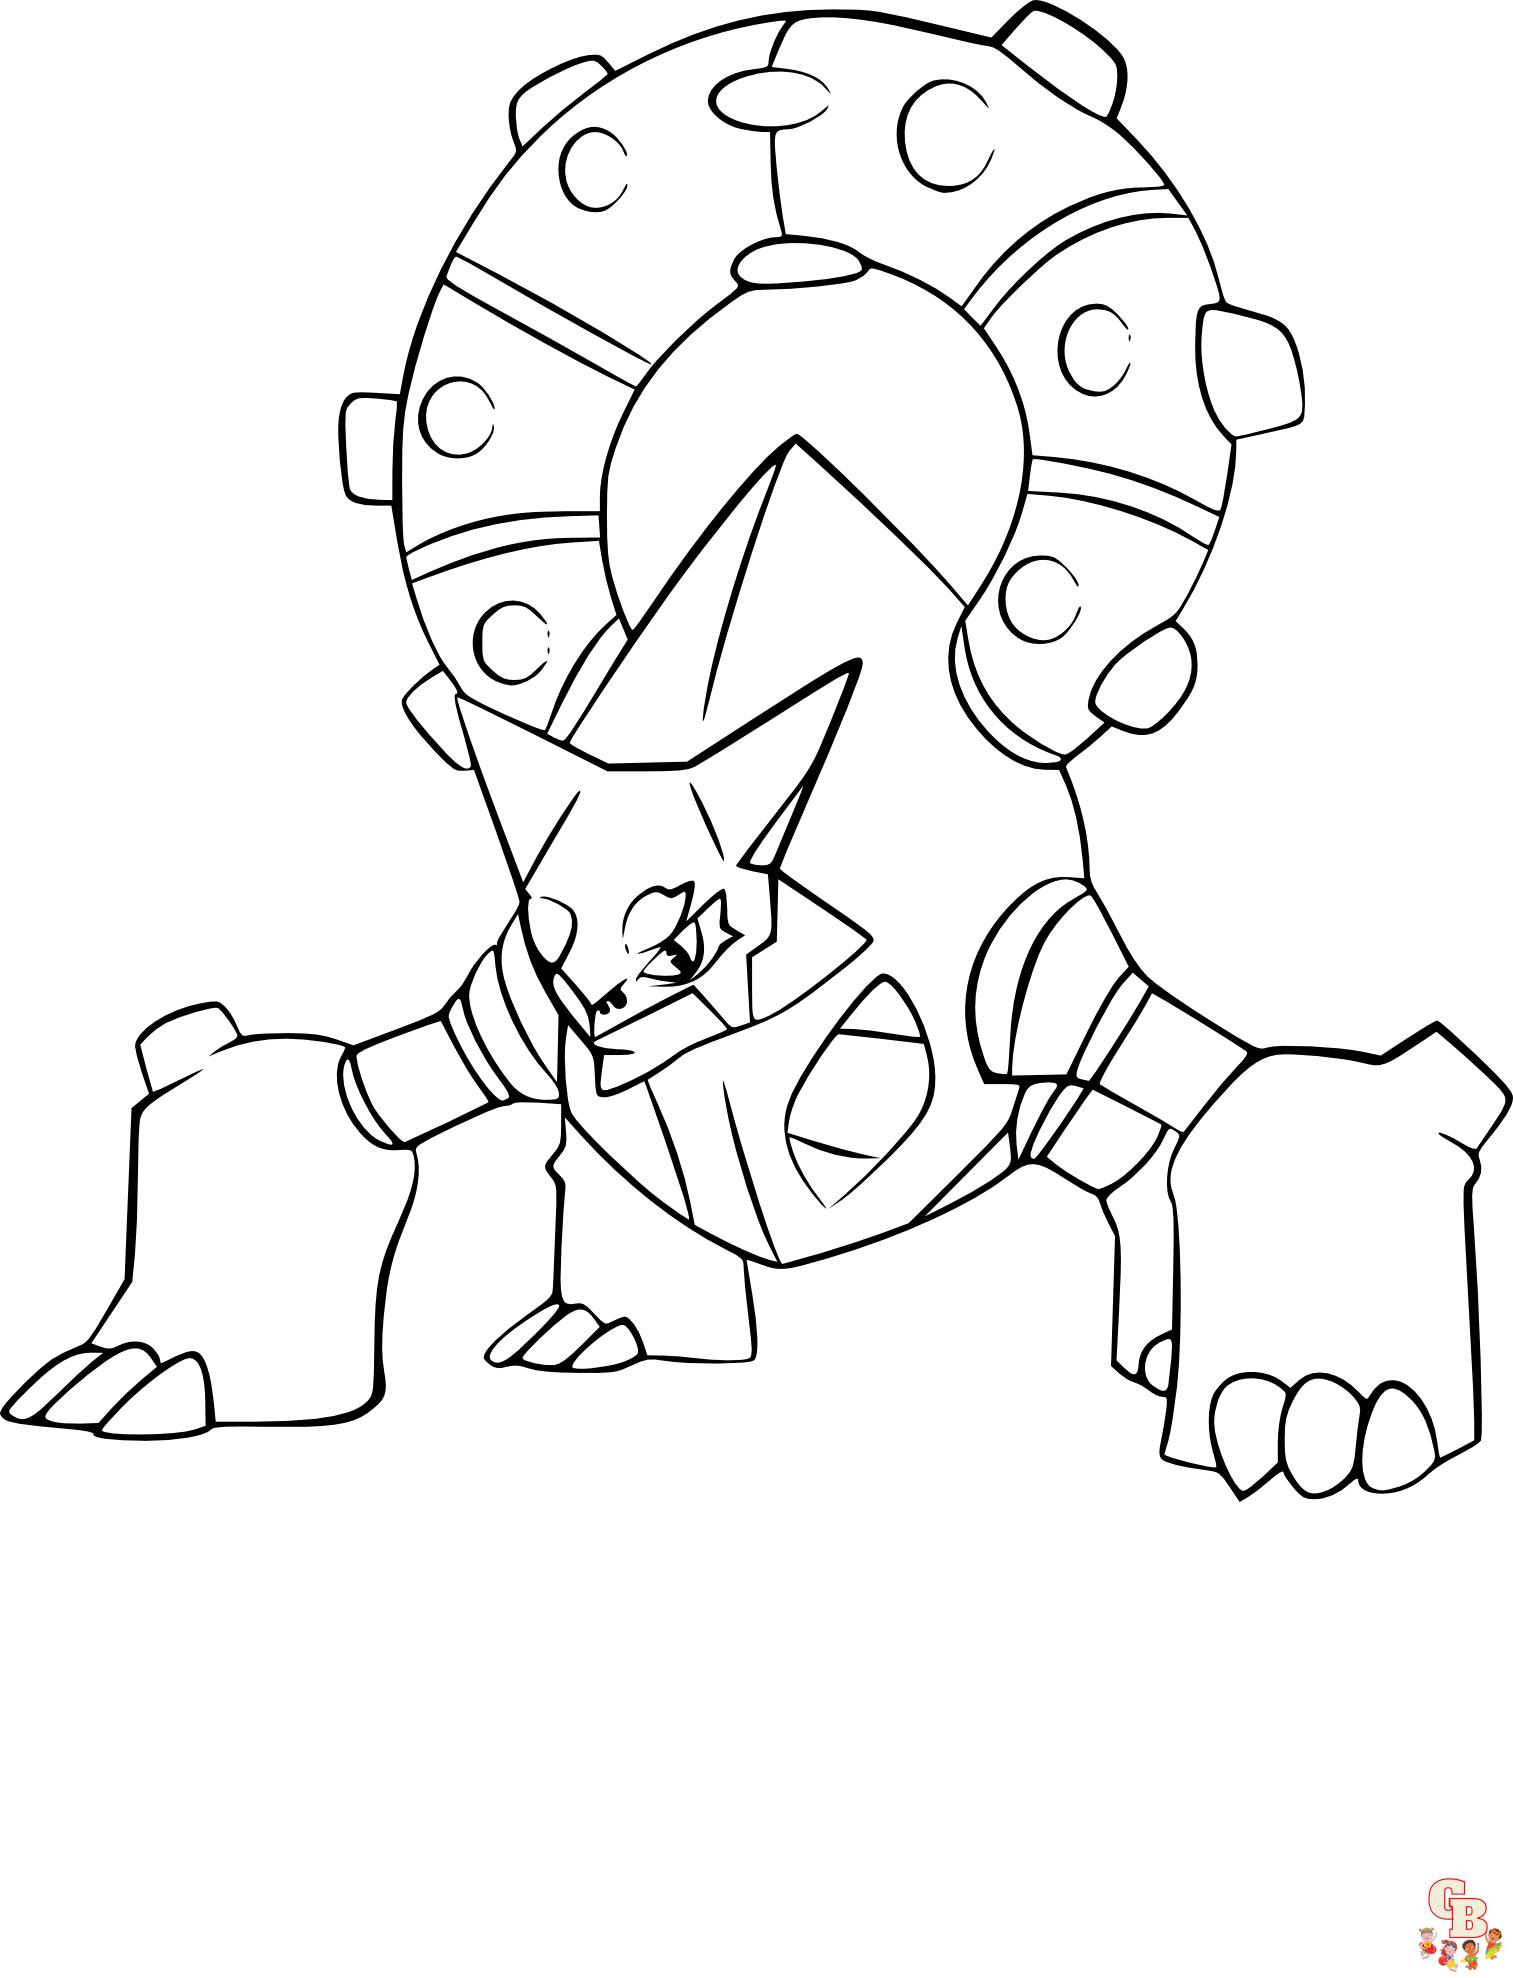 Pokemon Volcanion coloring pages